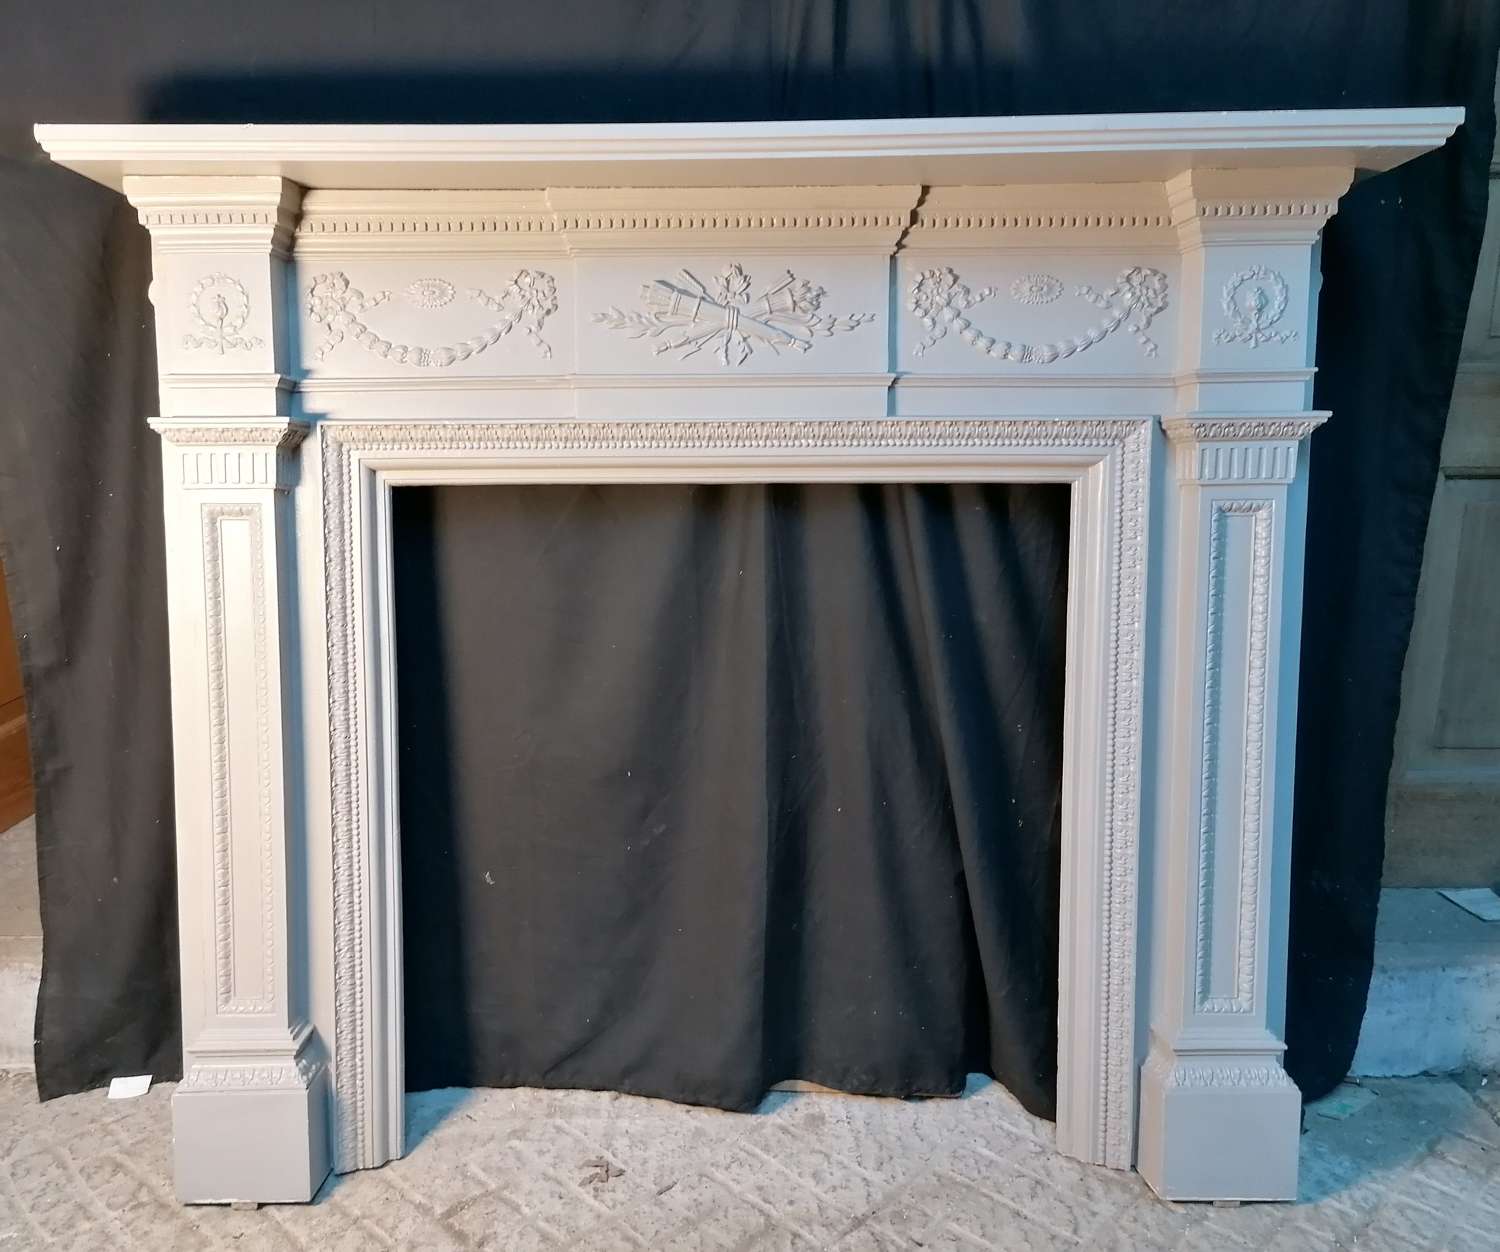 FS0135 A VERY LARGE RECLAIMED ANTIQUE PAINTED CAST IRON FIRE SURROUND